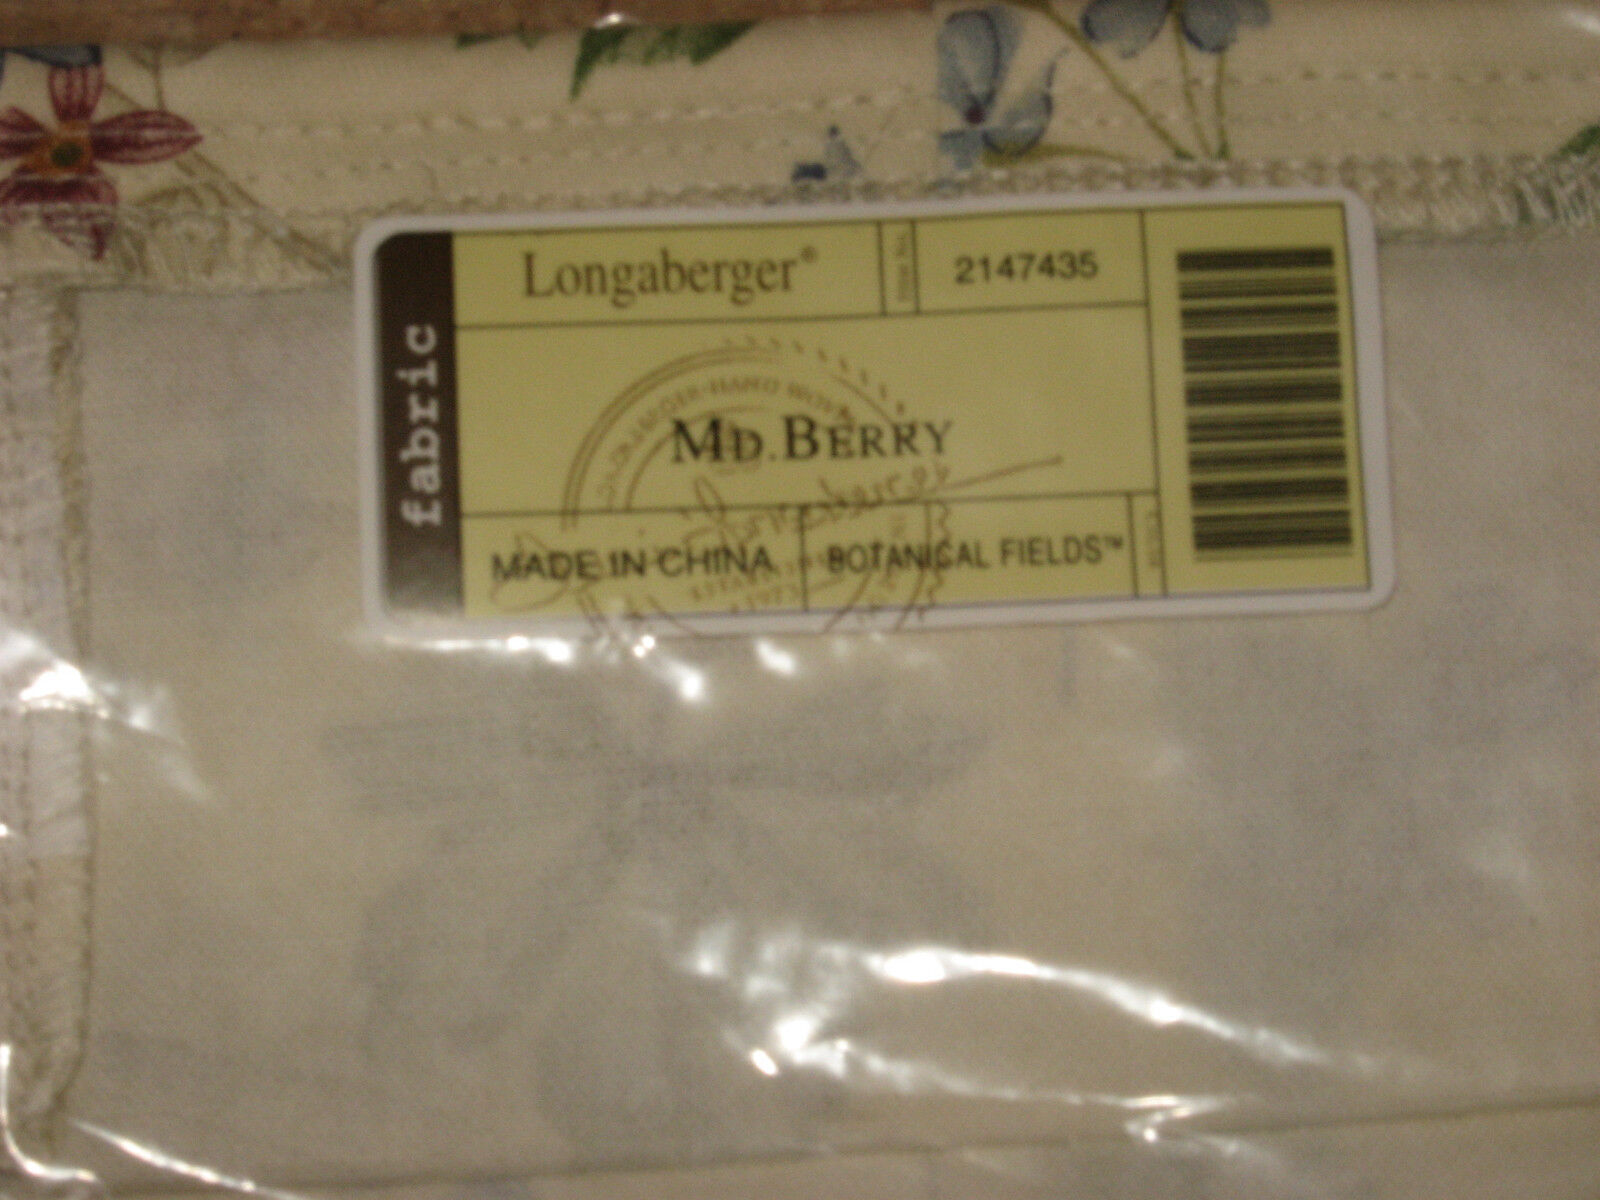 Longaberger Medium Berry Basket Liner only in Botanical Fields fabric in bag